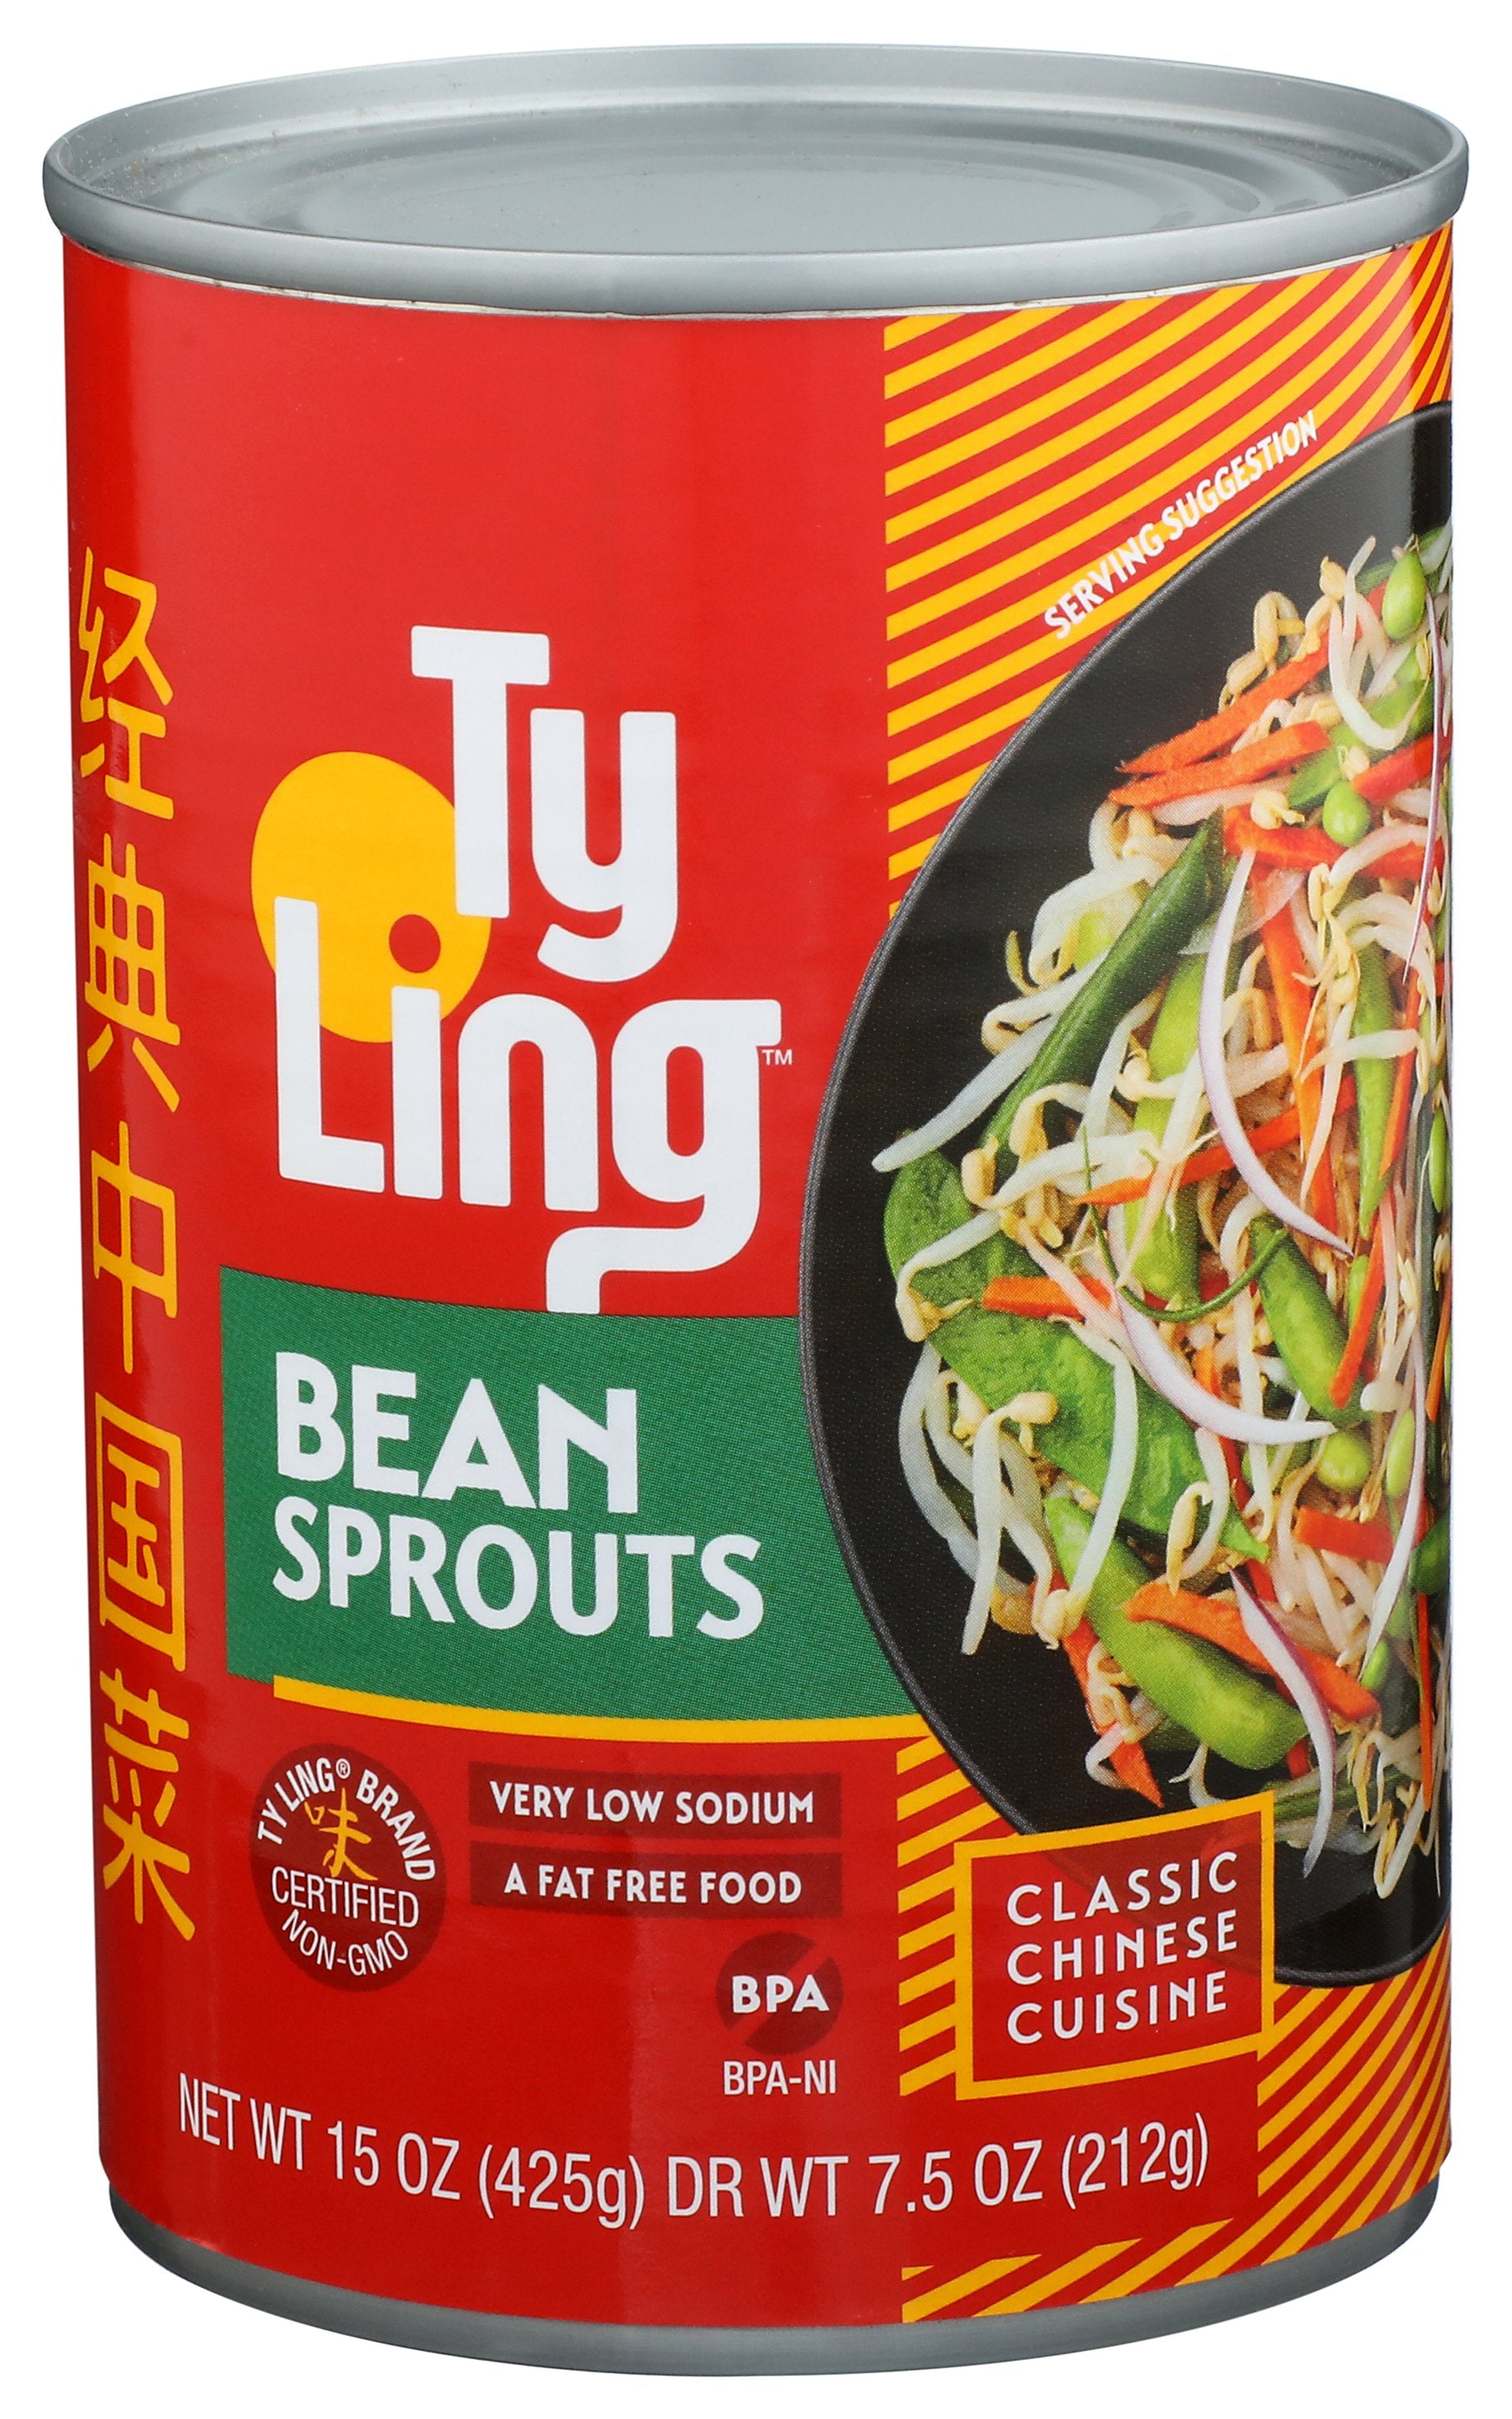 TY LING STIR FRY BEAN SPROUT - Case of 12